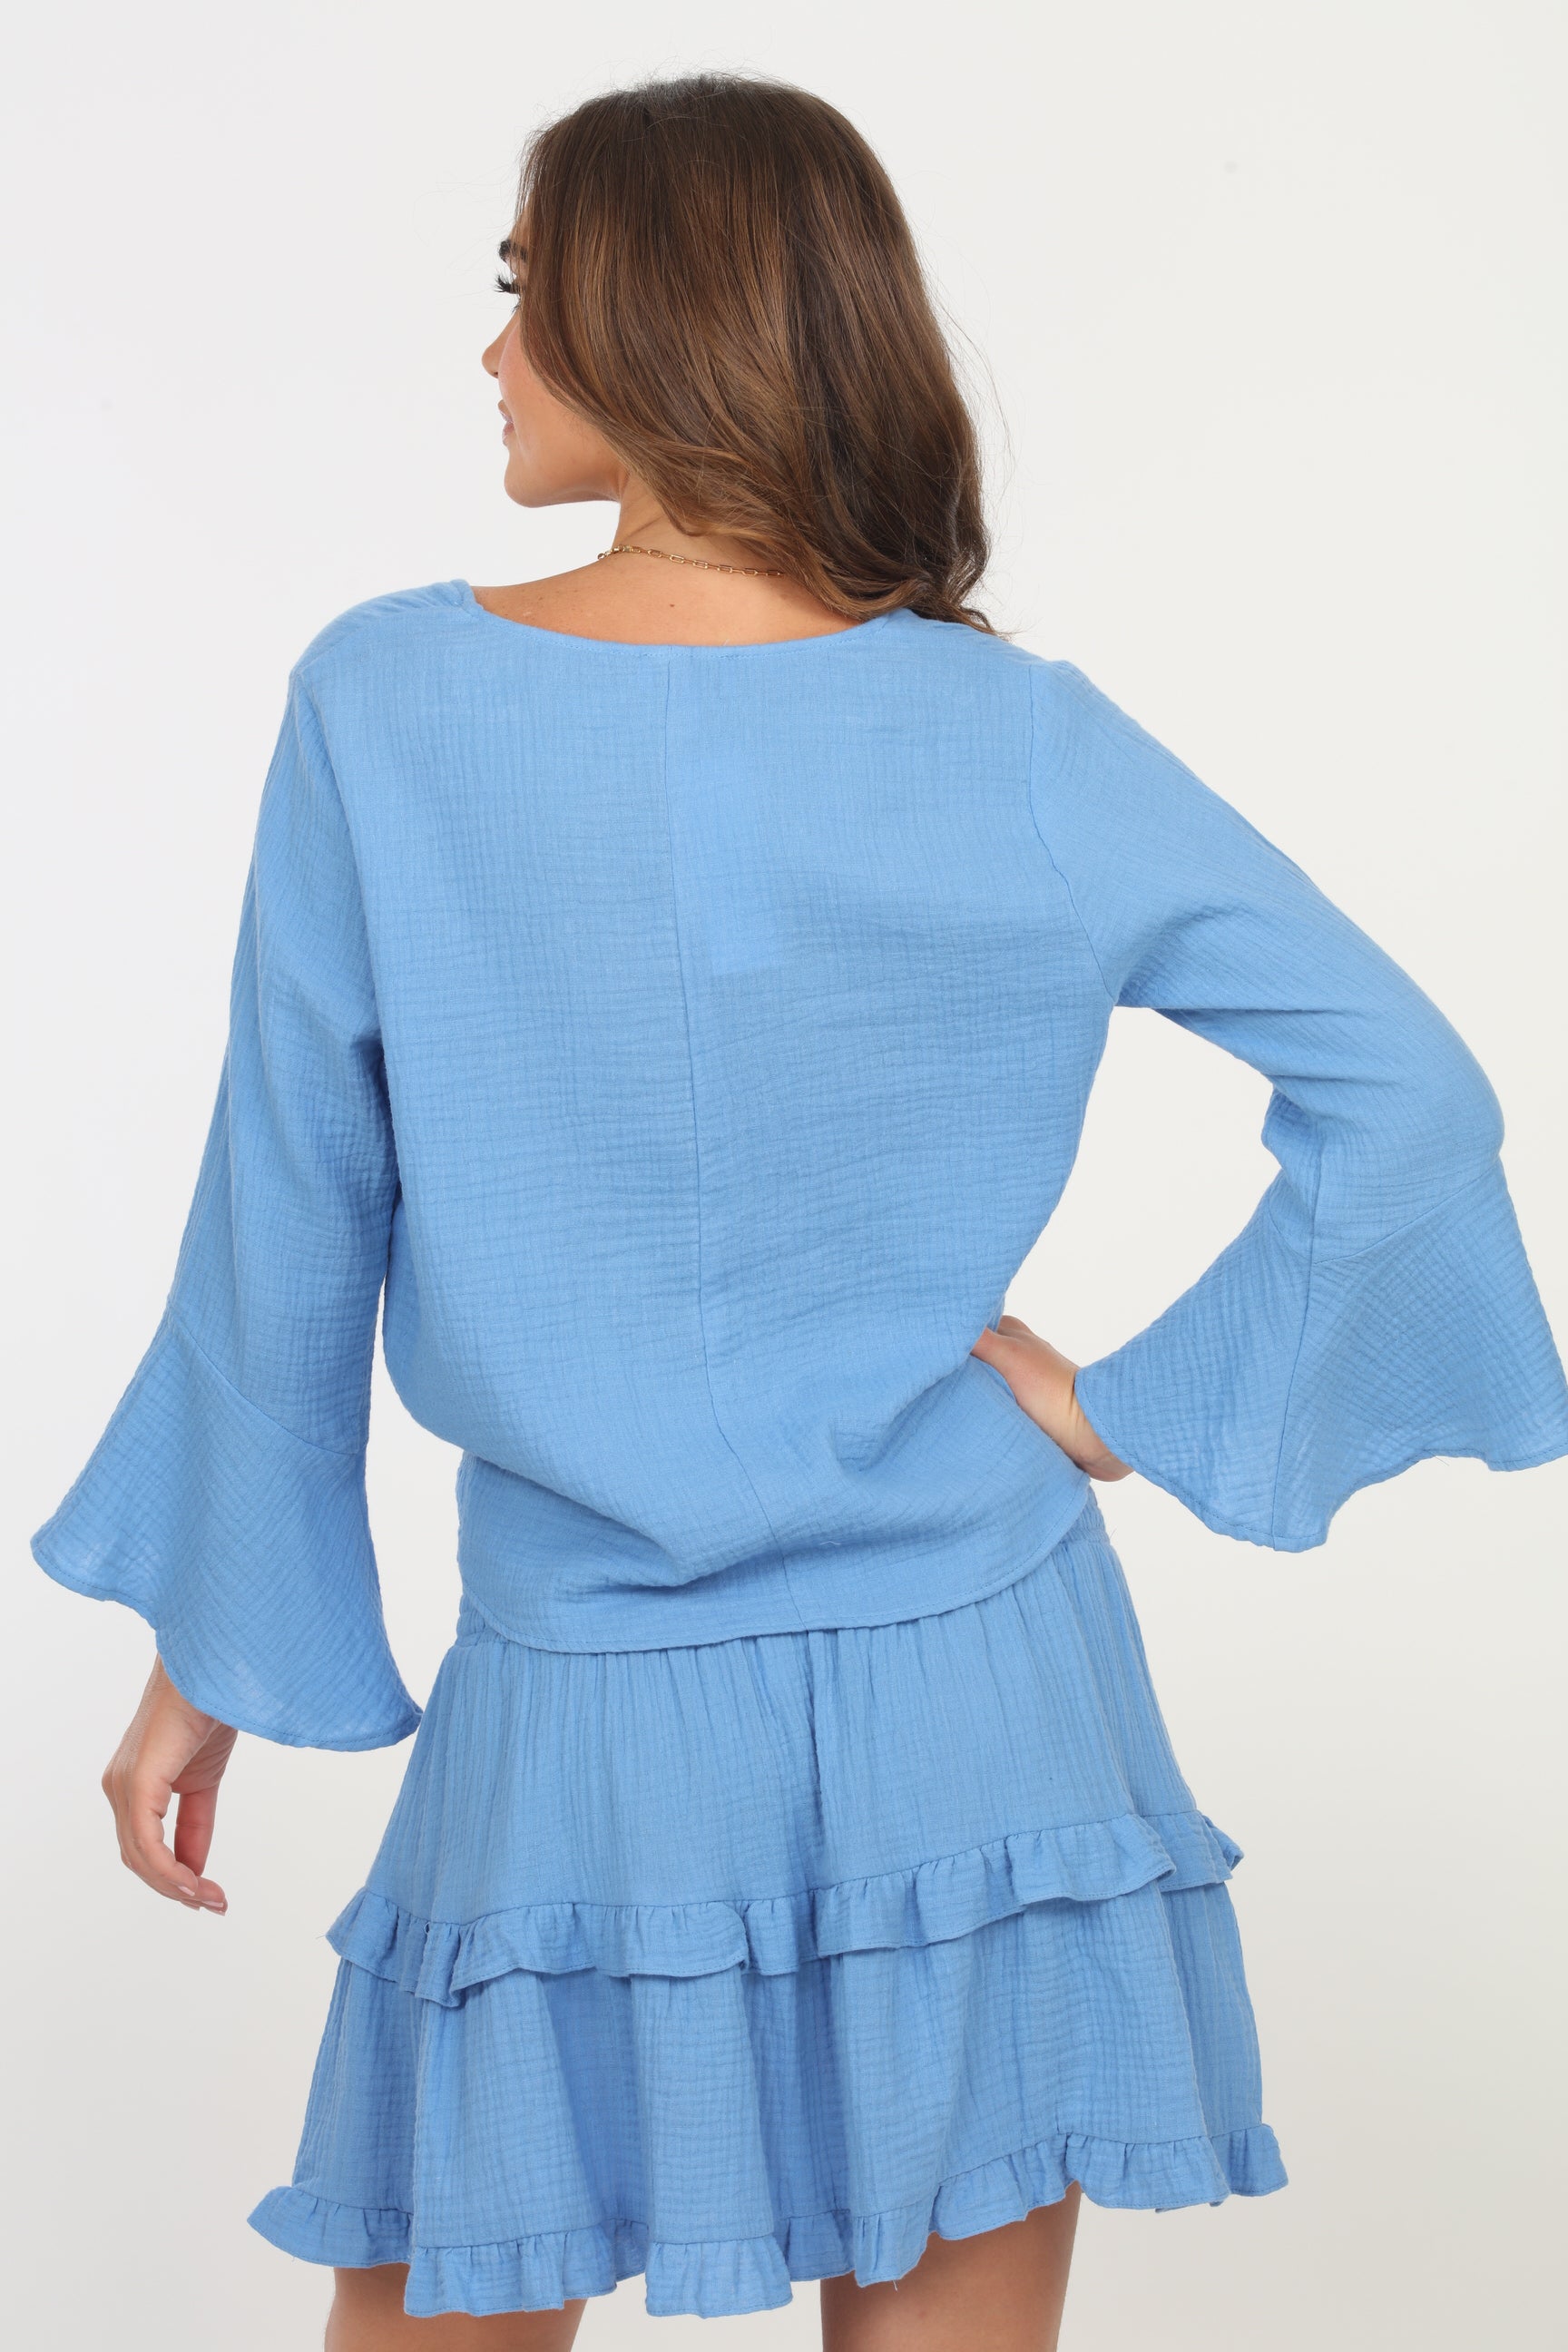 Cornflower Bell Sleeve Top with Front Tie